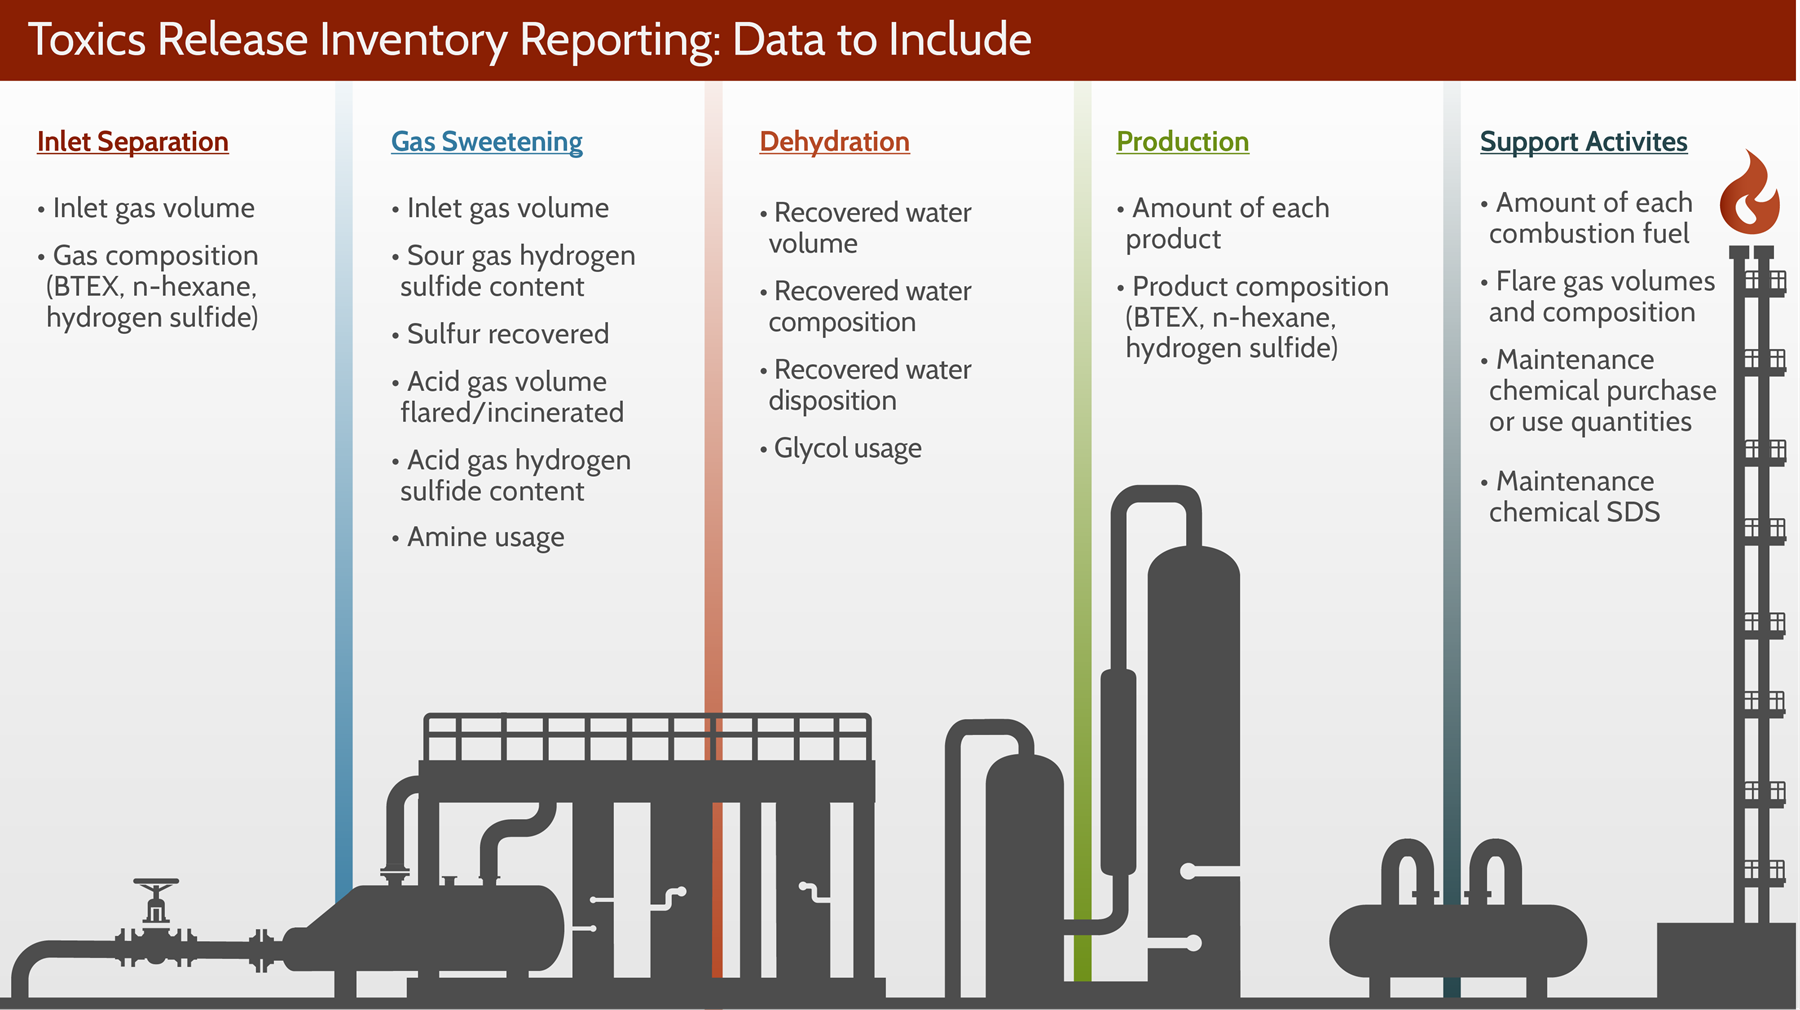 Graphic showing what data to report for TRI